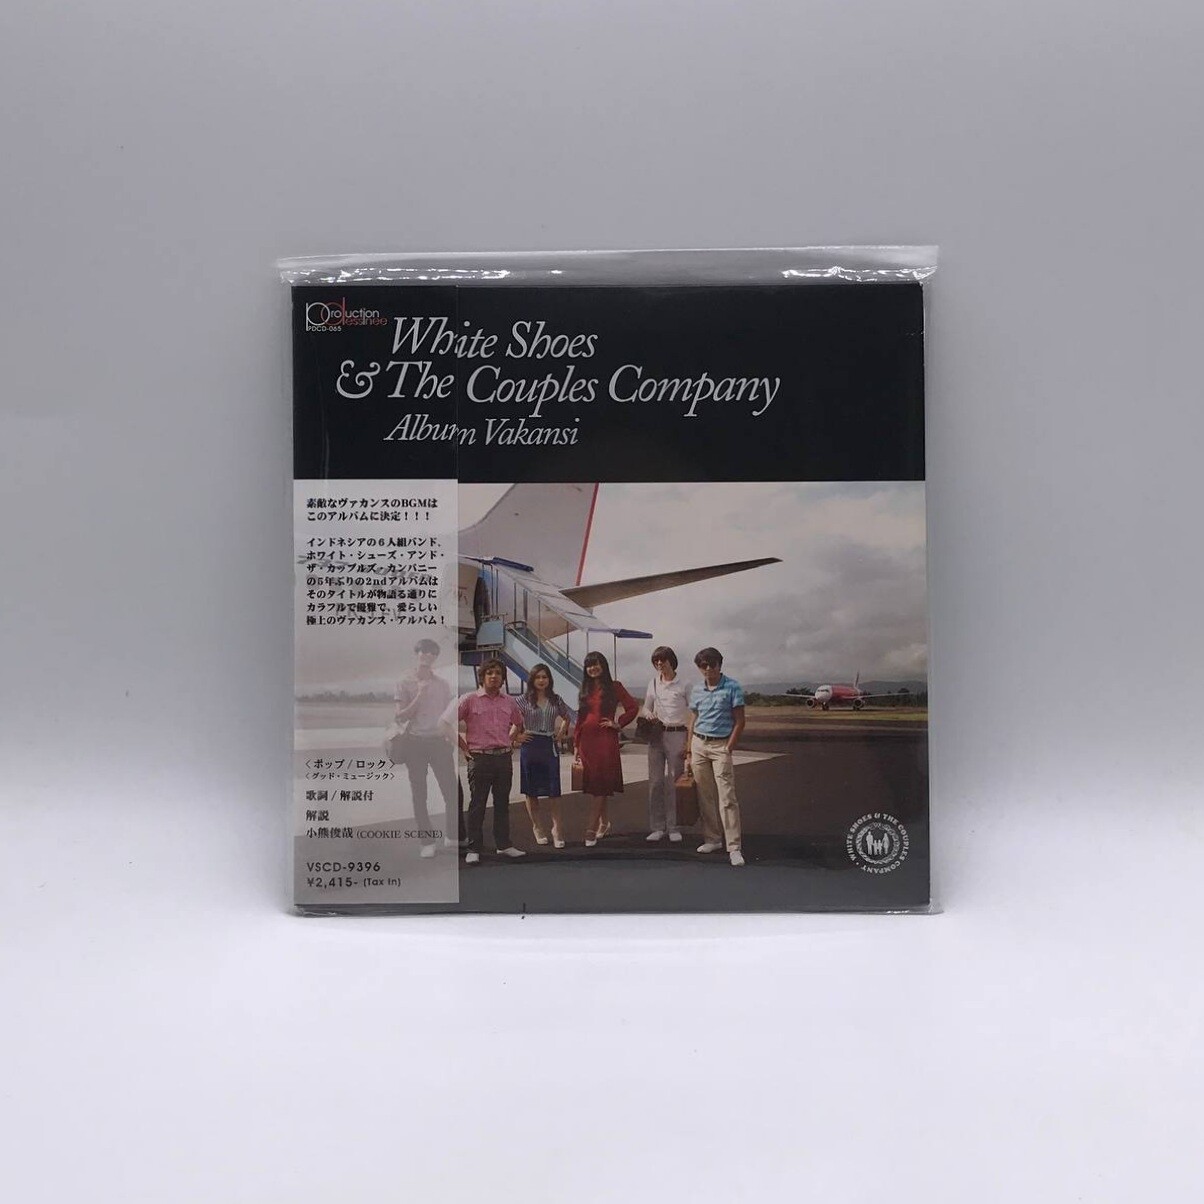 [USED] WHITE SHOES & THE COUPLES COMPANY -ALBUM VAKANSI- CD (JAPAN PRESS)